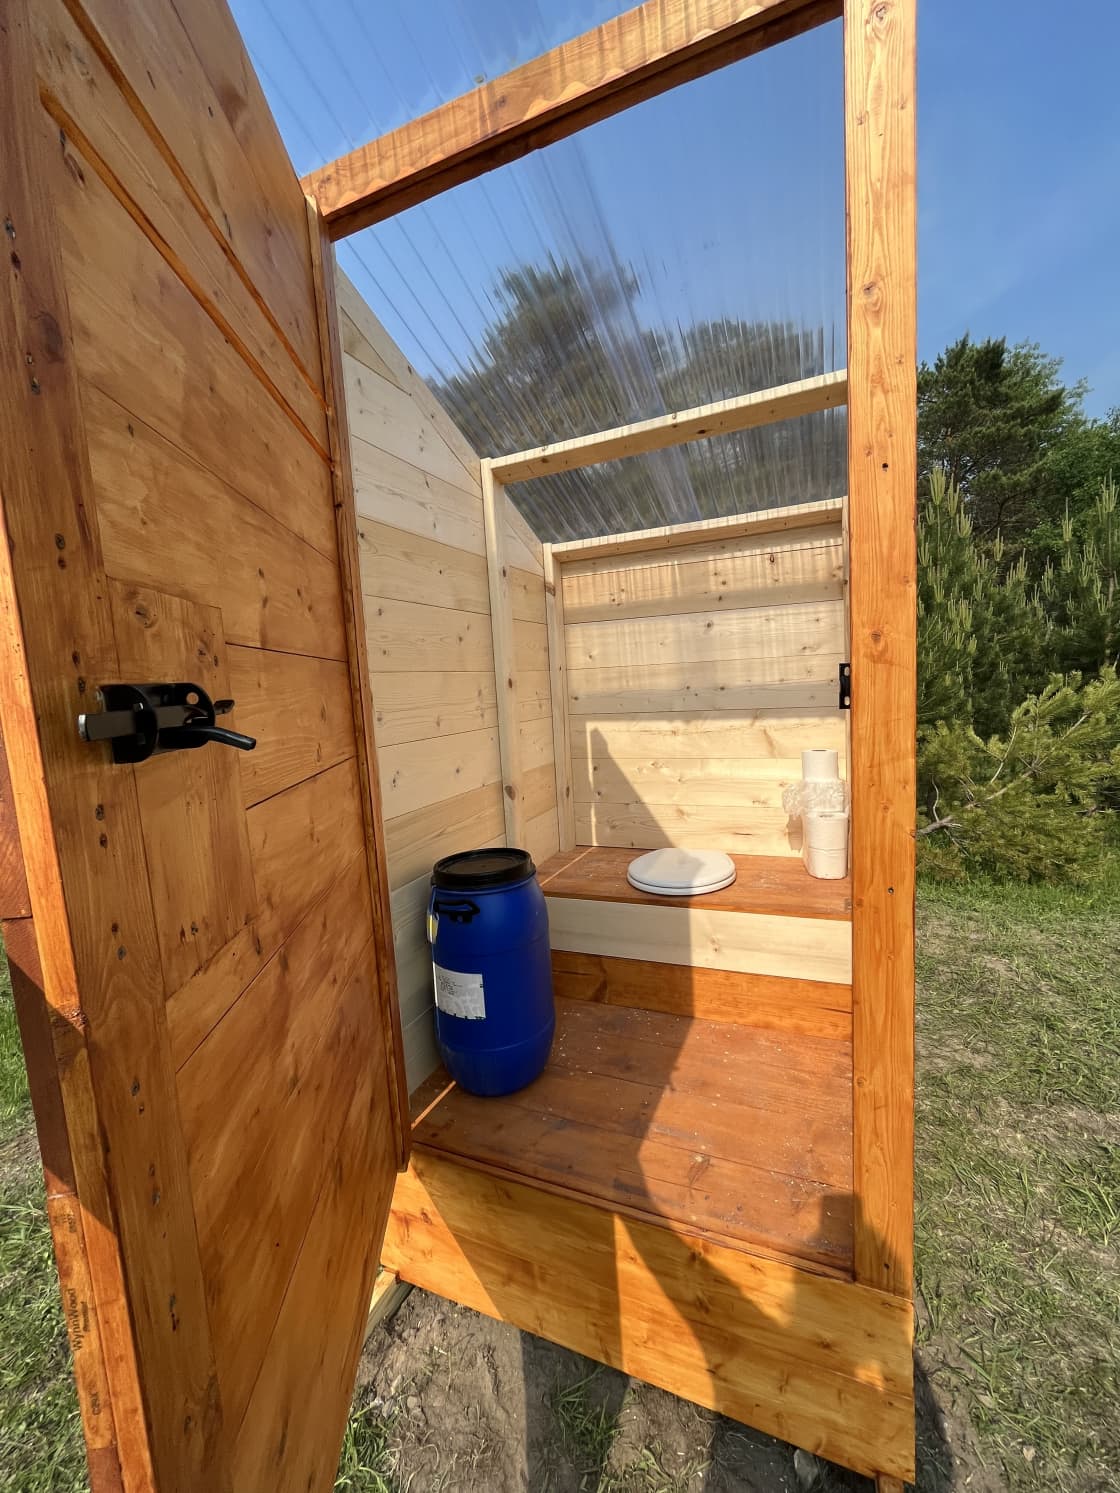 Interior of composting outhouse. Blue barrel holds the sawdust.